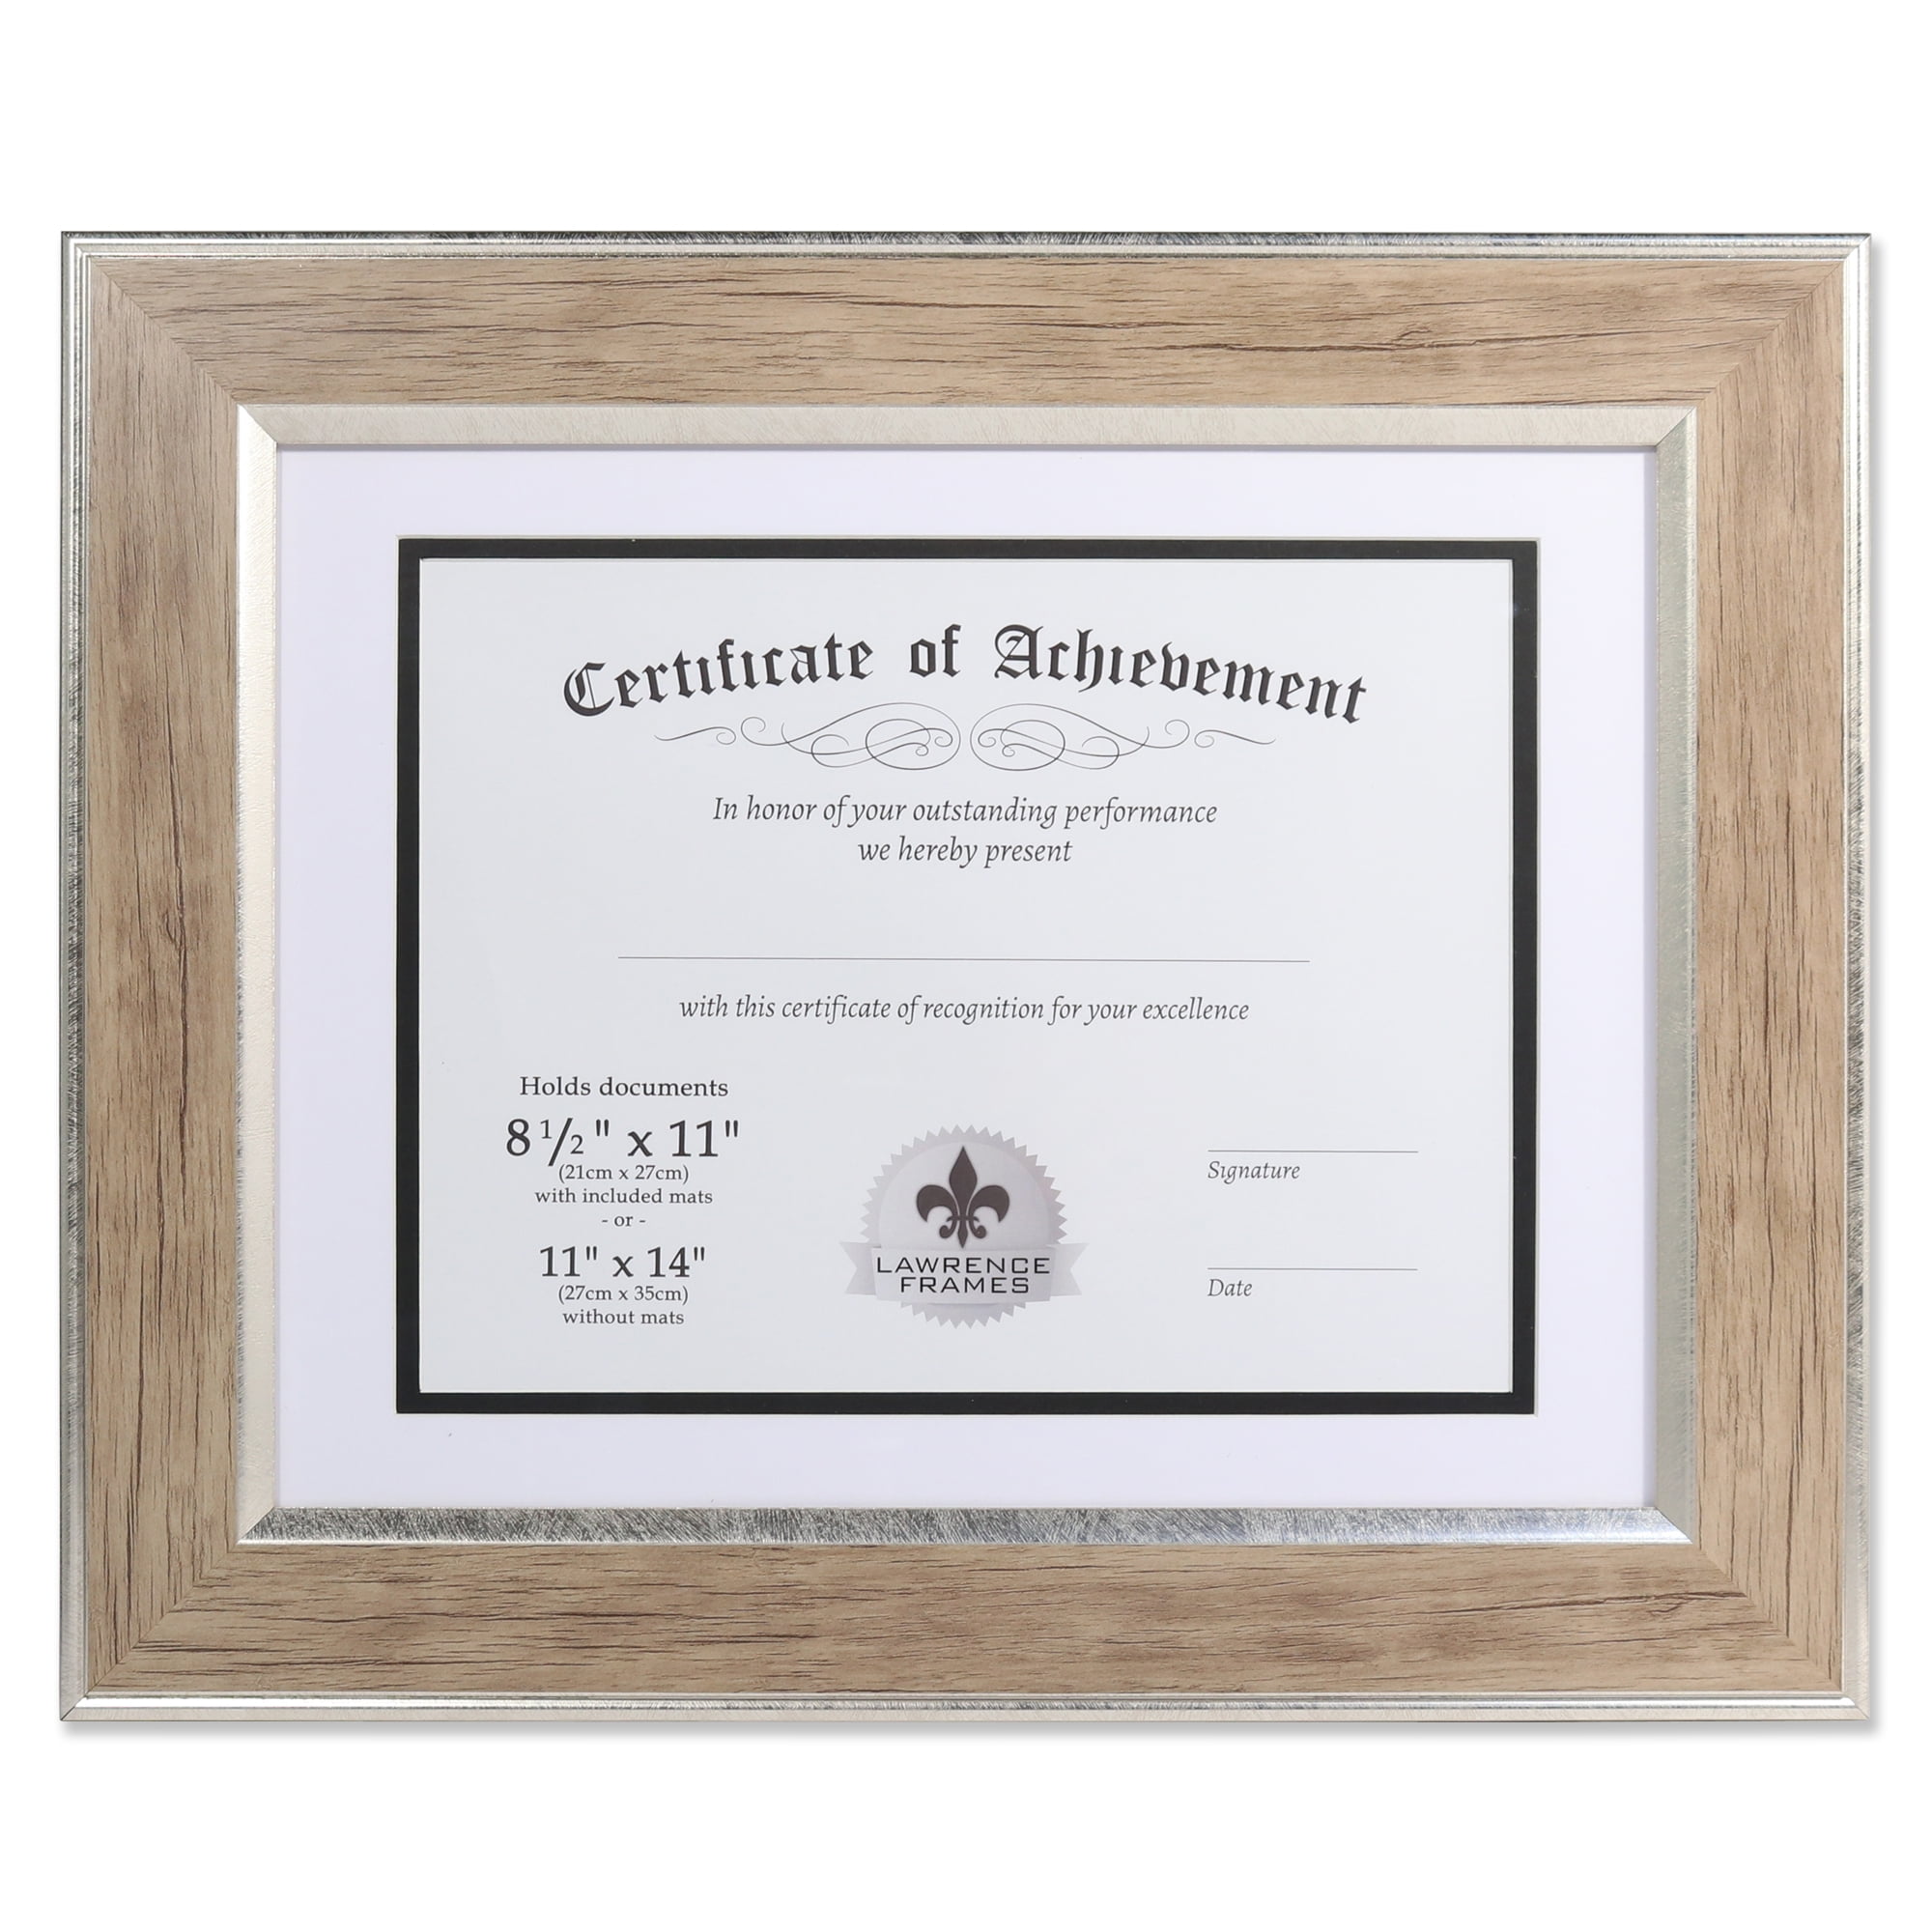 Double Mat 11x14 1" Silver Picture Frame Craig Frames Complete Document Frame 